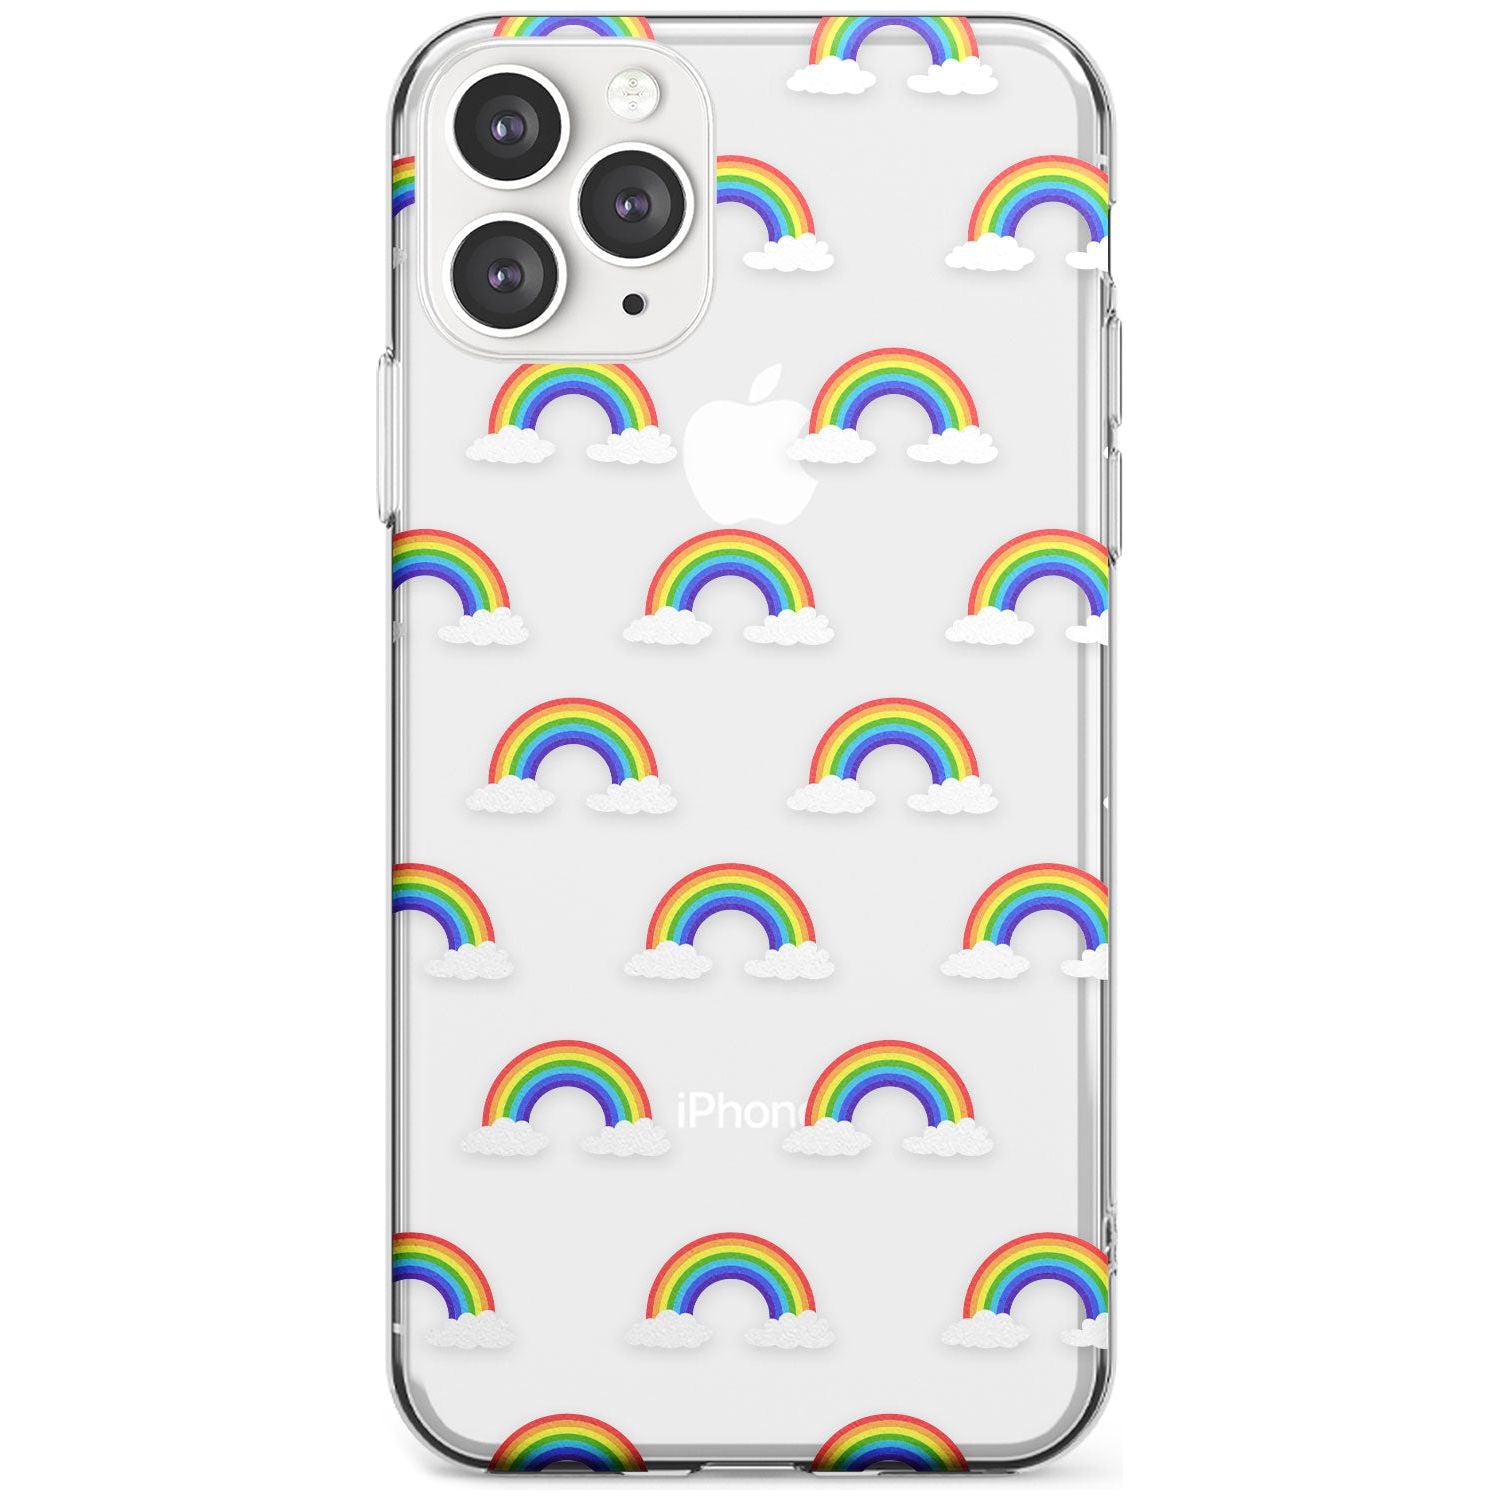 Rainbow of possibilities Slim TPU Phone Case for iPhone 11 Pro Max